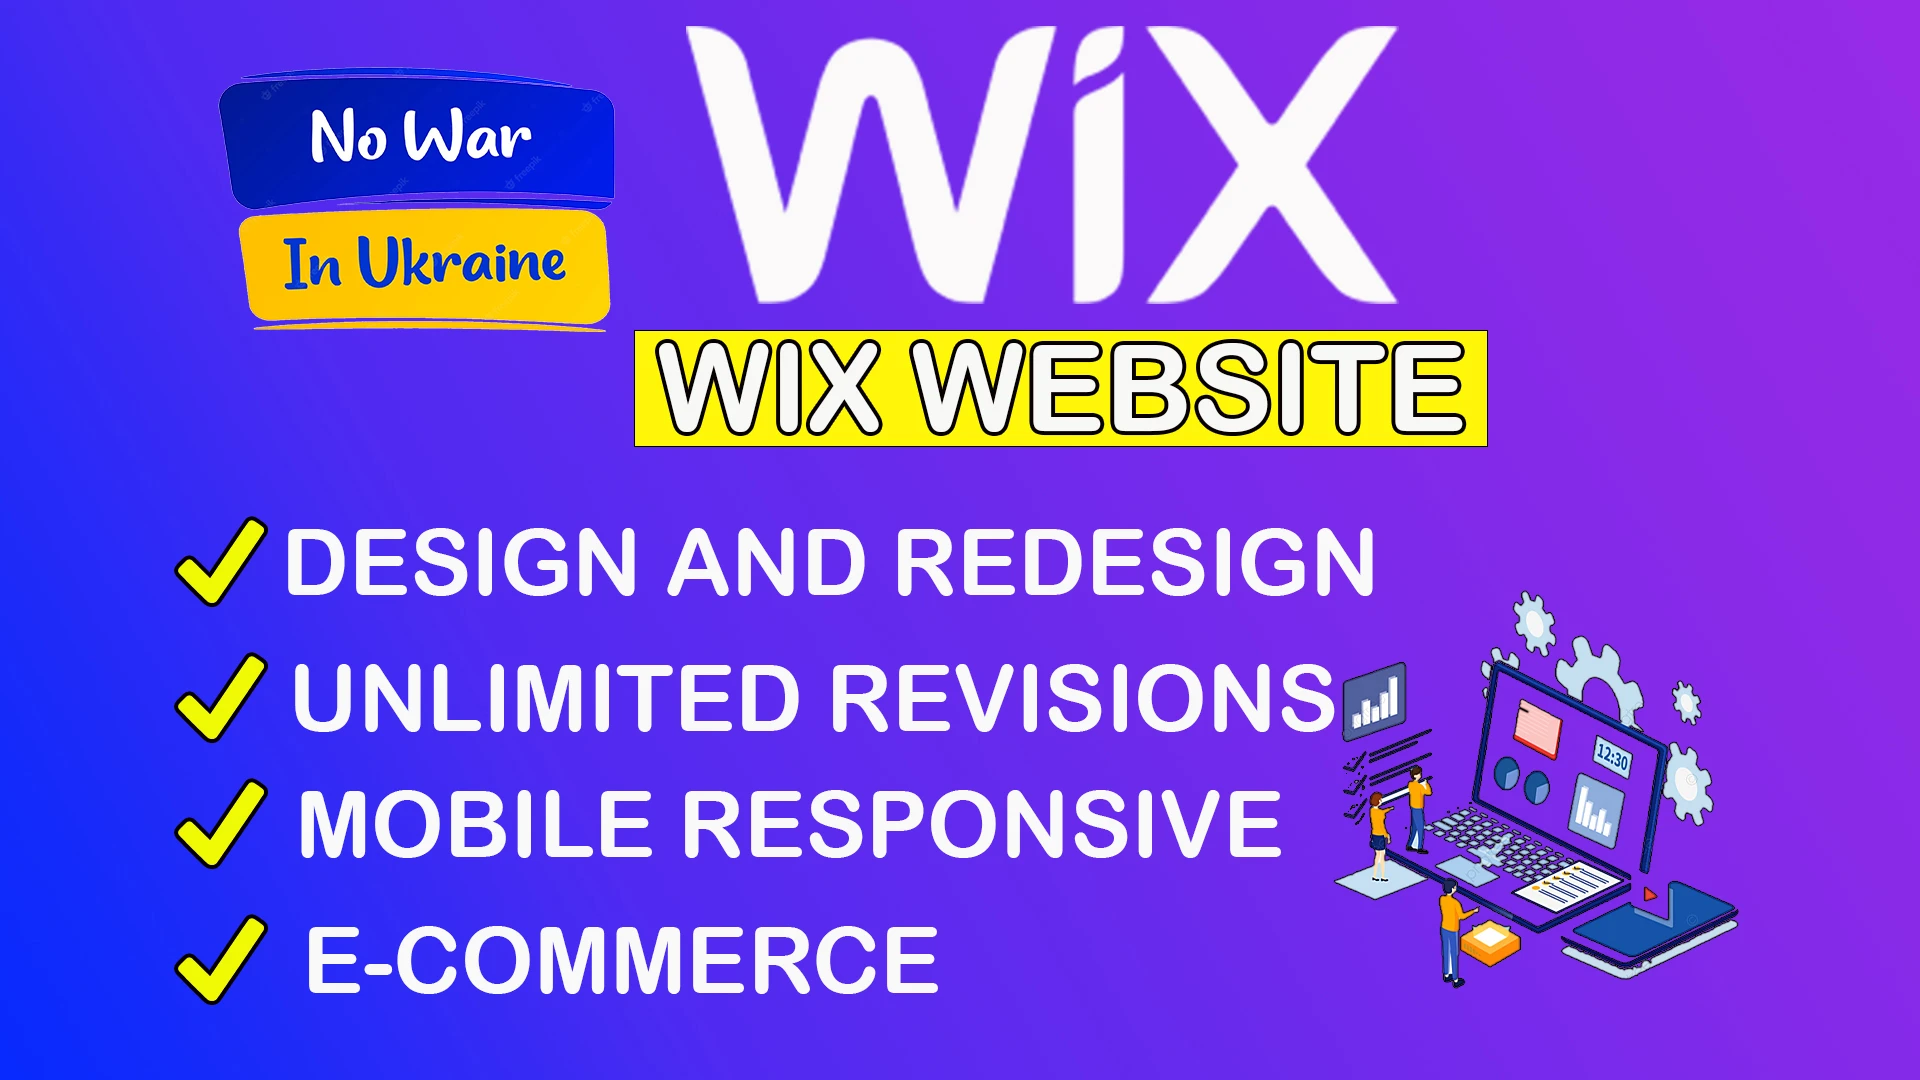 Wix Design/Rededign upto 10 pages Mobile Responsive E-commerce SEO SETUP SITE SUPPORT FOREVER